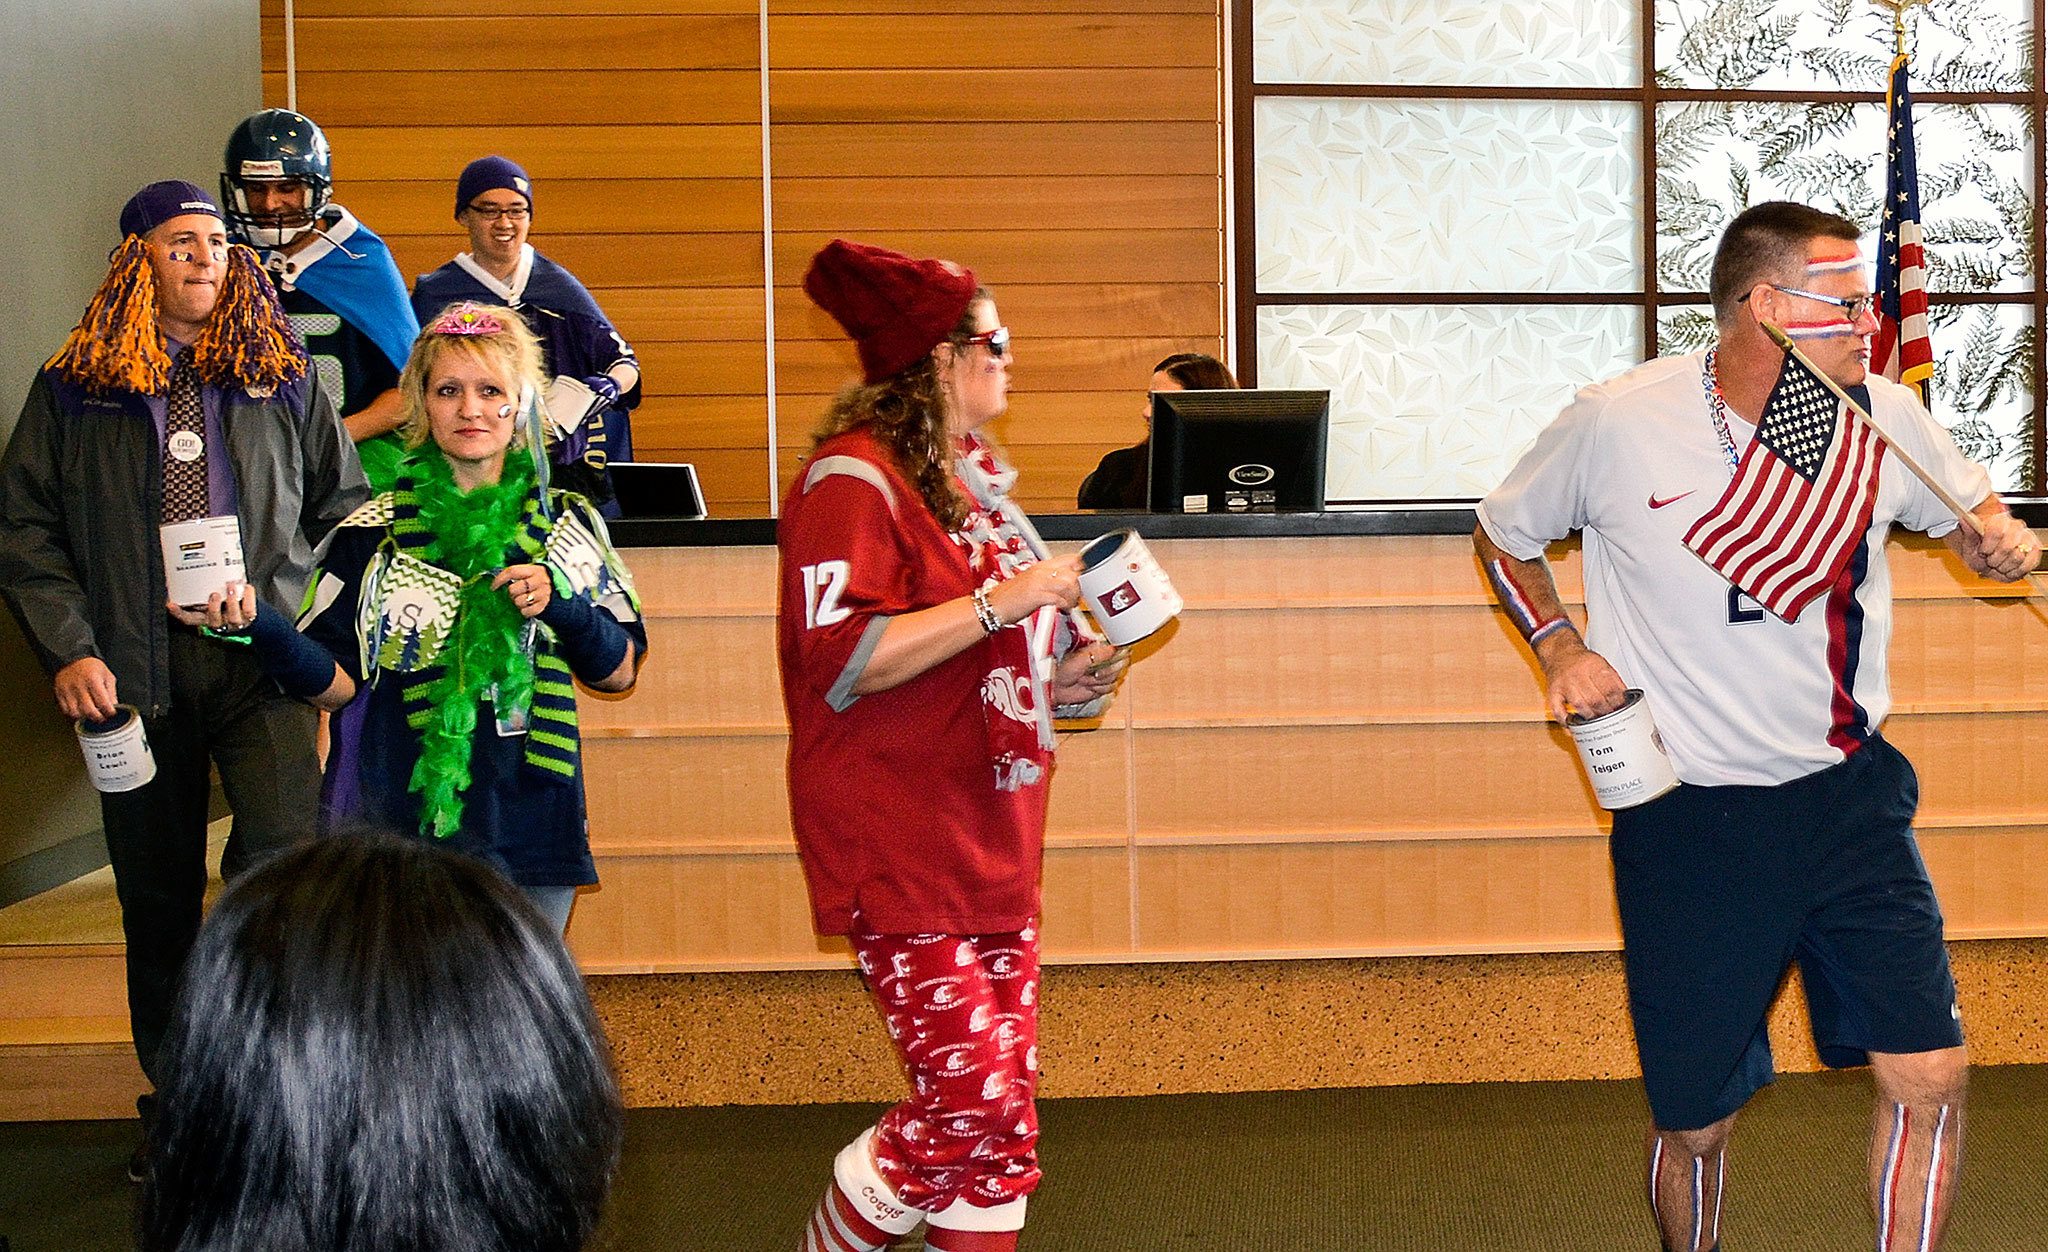 Snohomish County employees show off their favorite sports-fan regalia in October during a fundraising fashion show at the county administration building. Last week, they donated $1,209 to the Everett Gospel Mission Women and Children’s Shelter. (Photo courtesy Snohomish County)